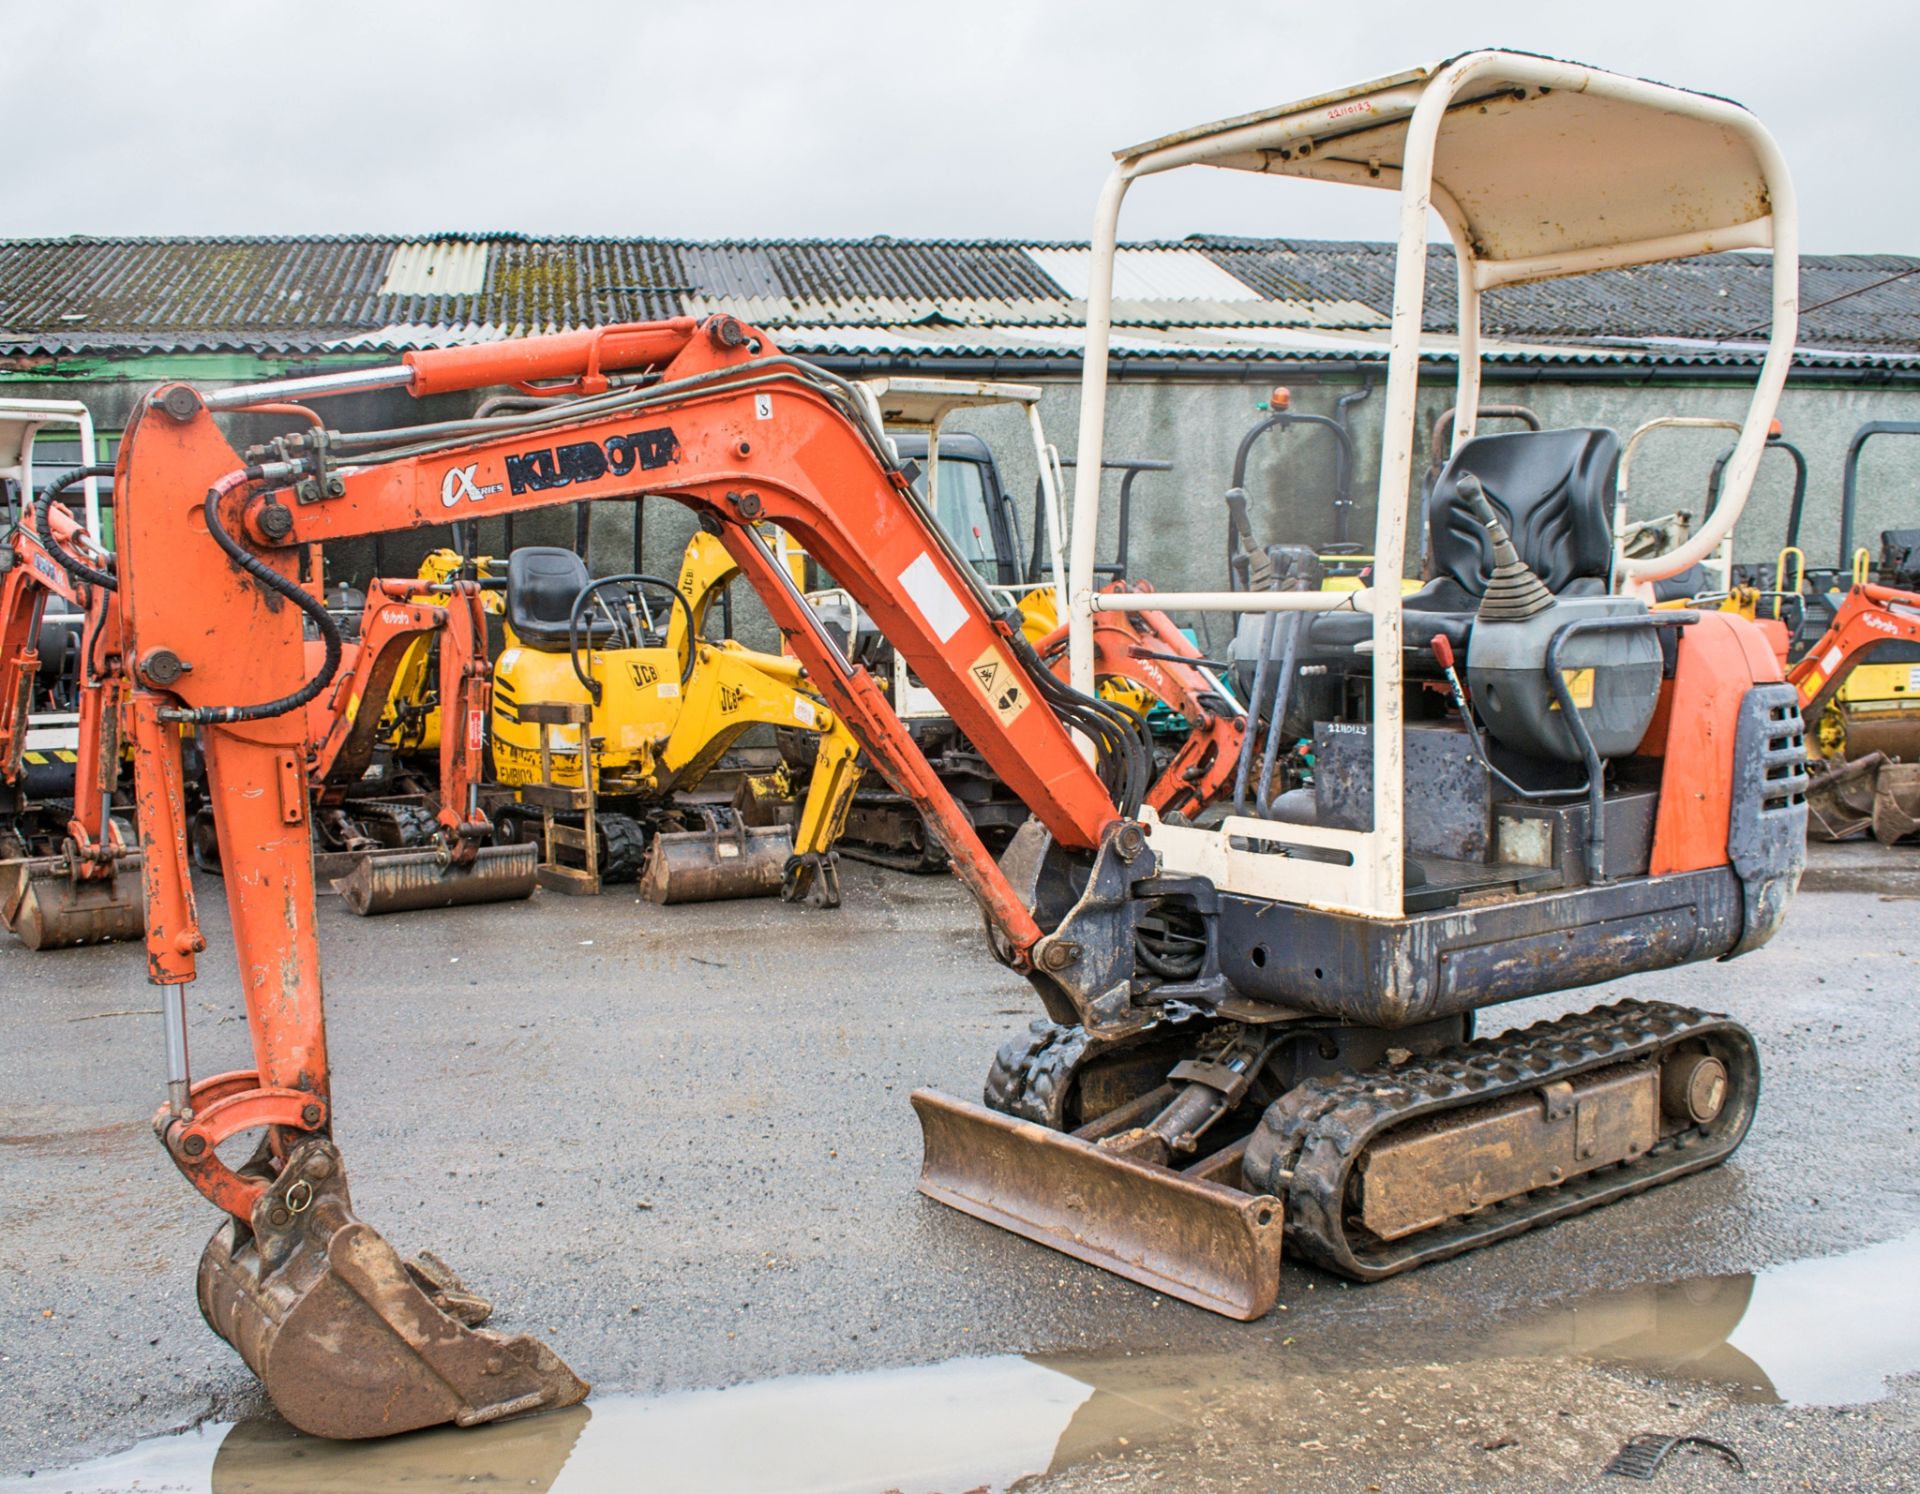 Kubota KX36-2 1.5 tonne rubber tracked excavator Year: 2004 S/N: 7058884 Recorded Hours: 2628